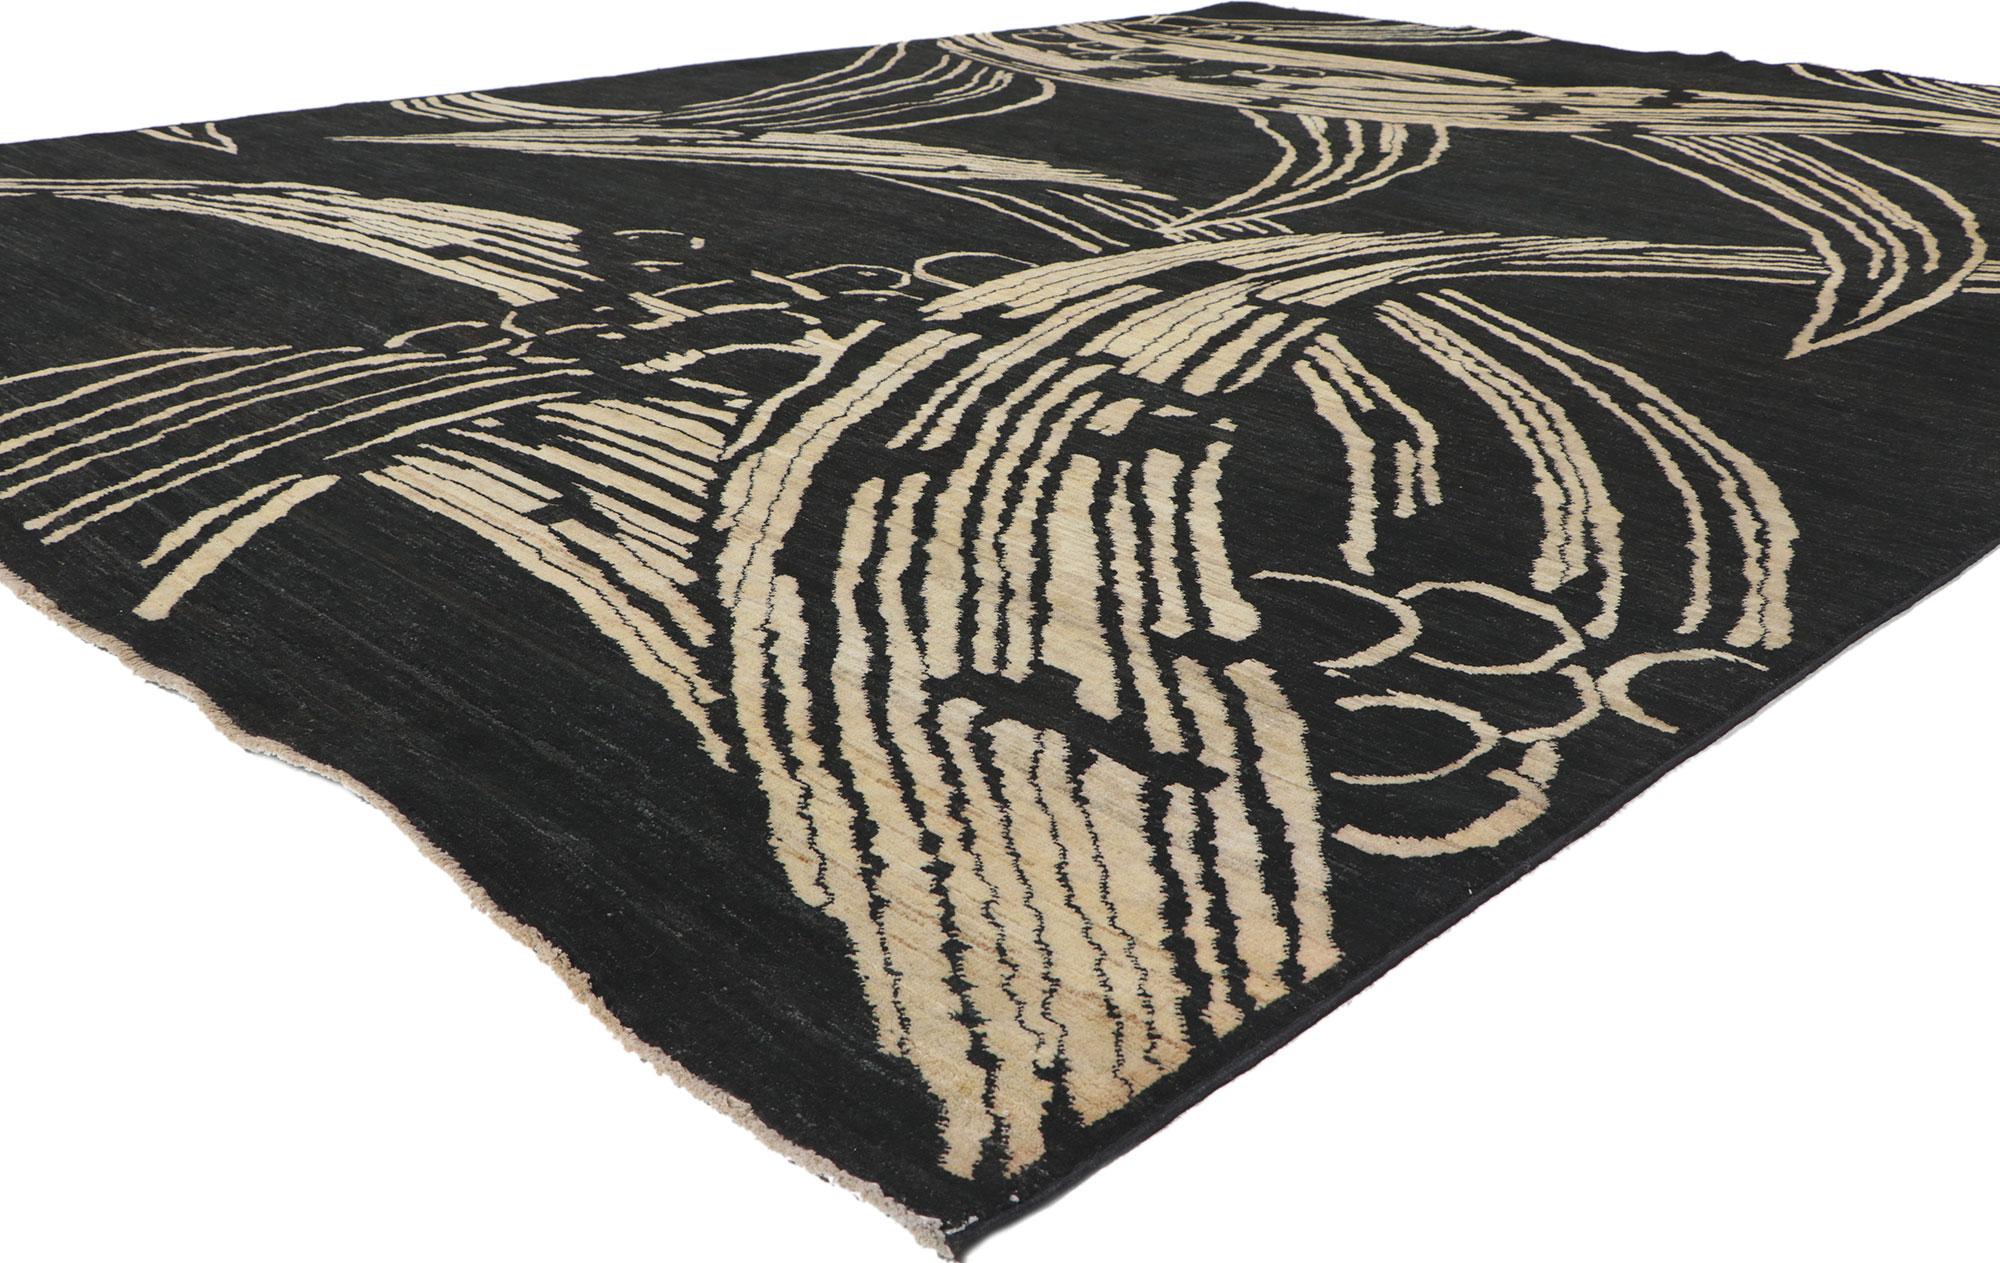 80750 New Contemporary Area rug with Modern style and Biophilic Design, 09'10 x 12'11. With its modern style, incredible detail and texture, this hand knotted wool contemporary rug is a captivating vision of woven beauty. The eye-catching botanical